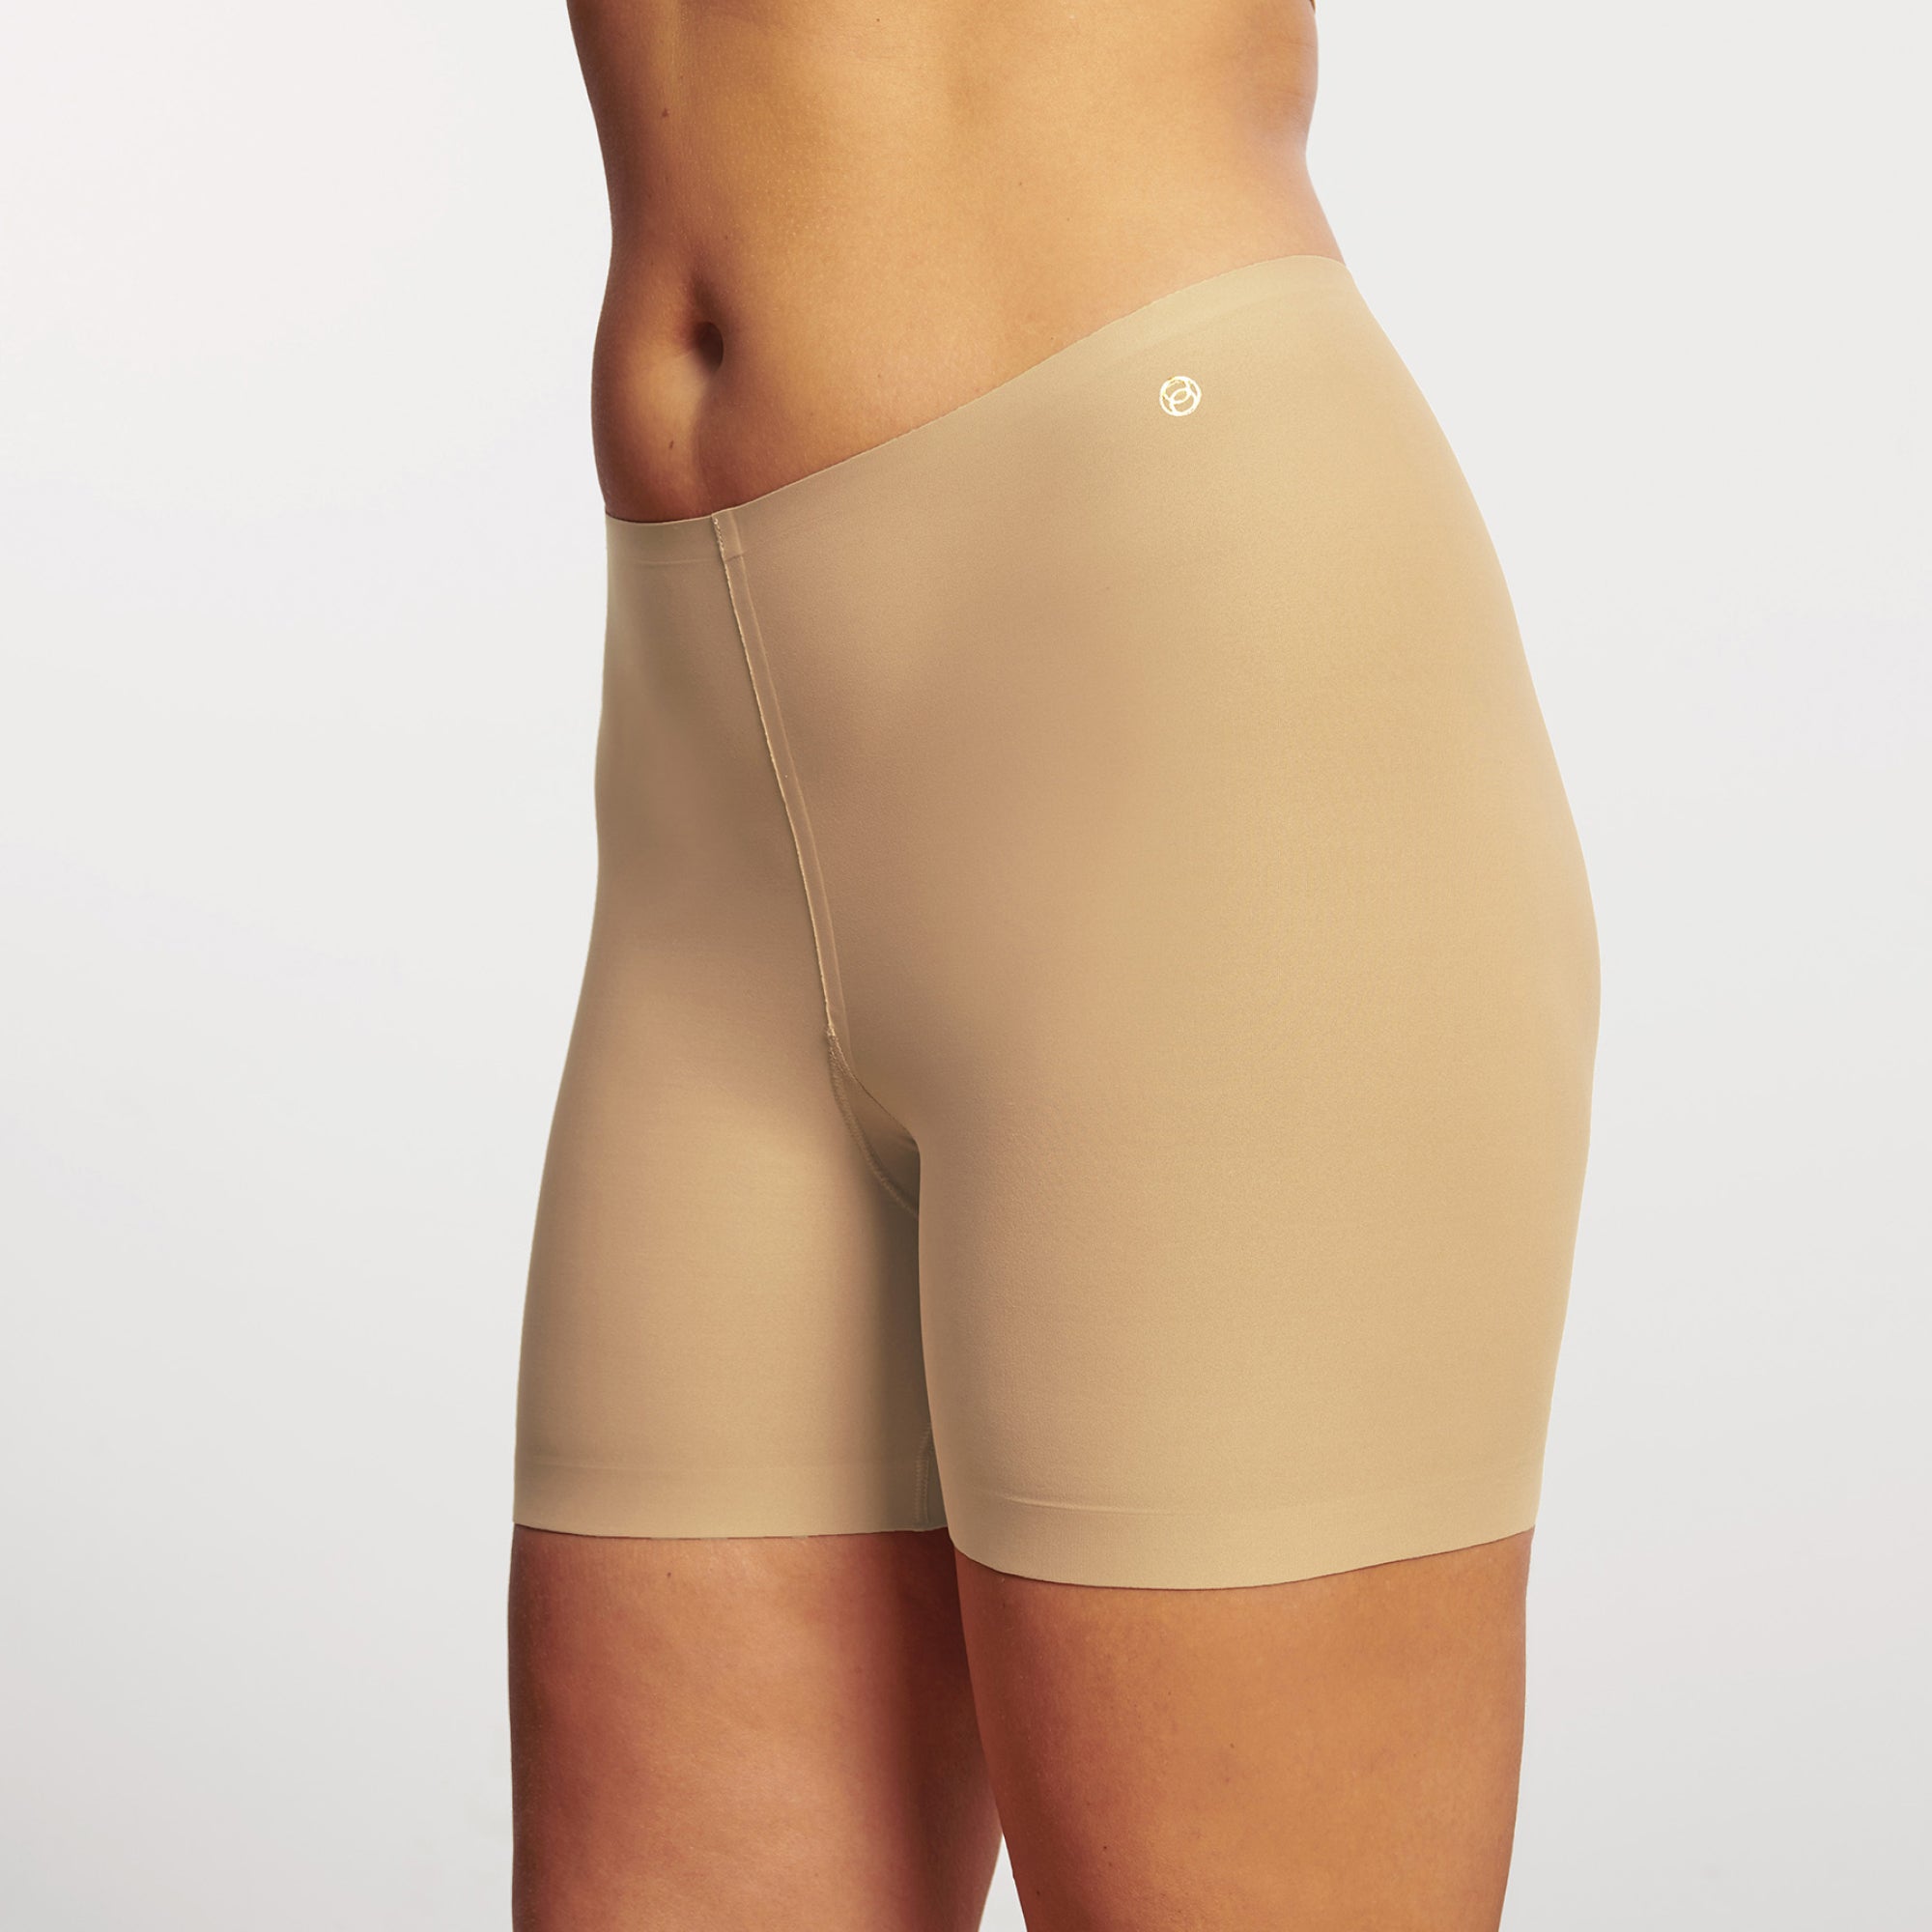 Women's Seamless Invisible Boyshort With Cotton Gusset - Buy China